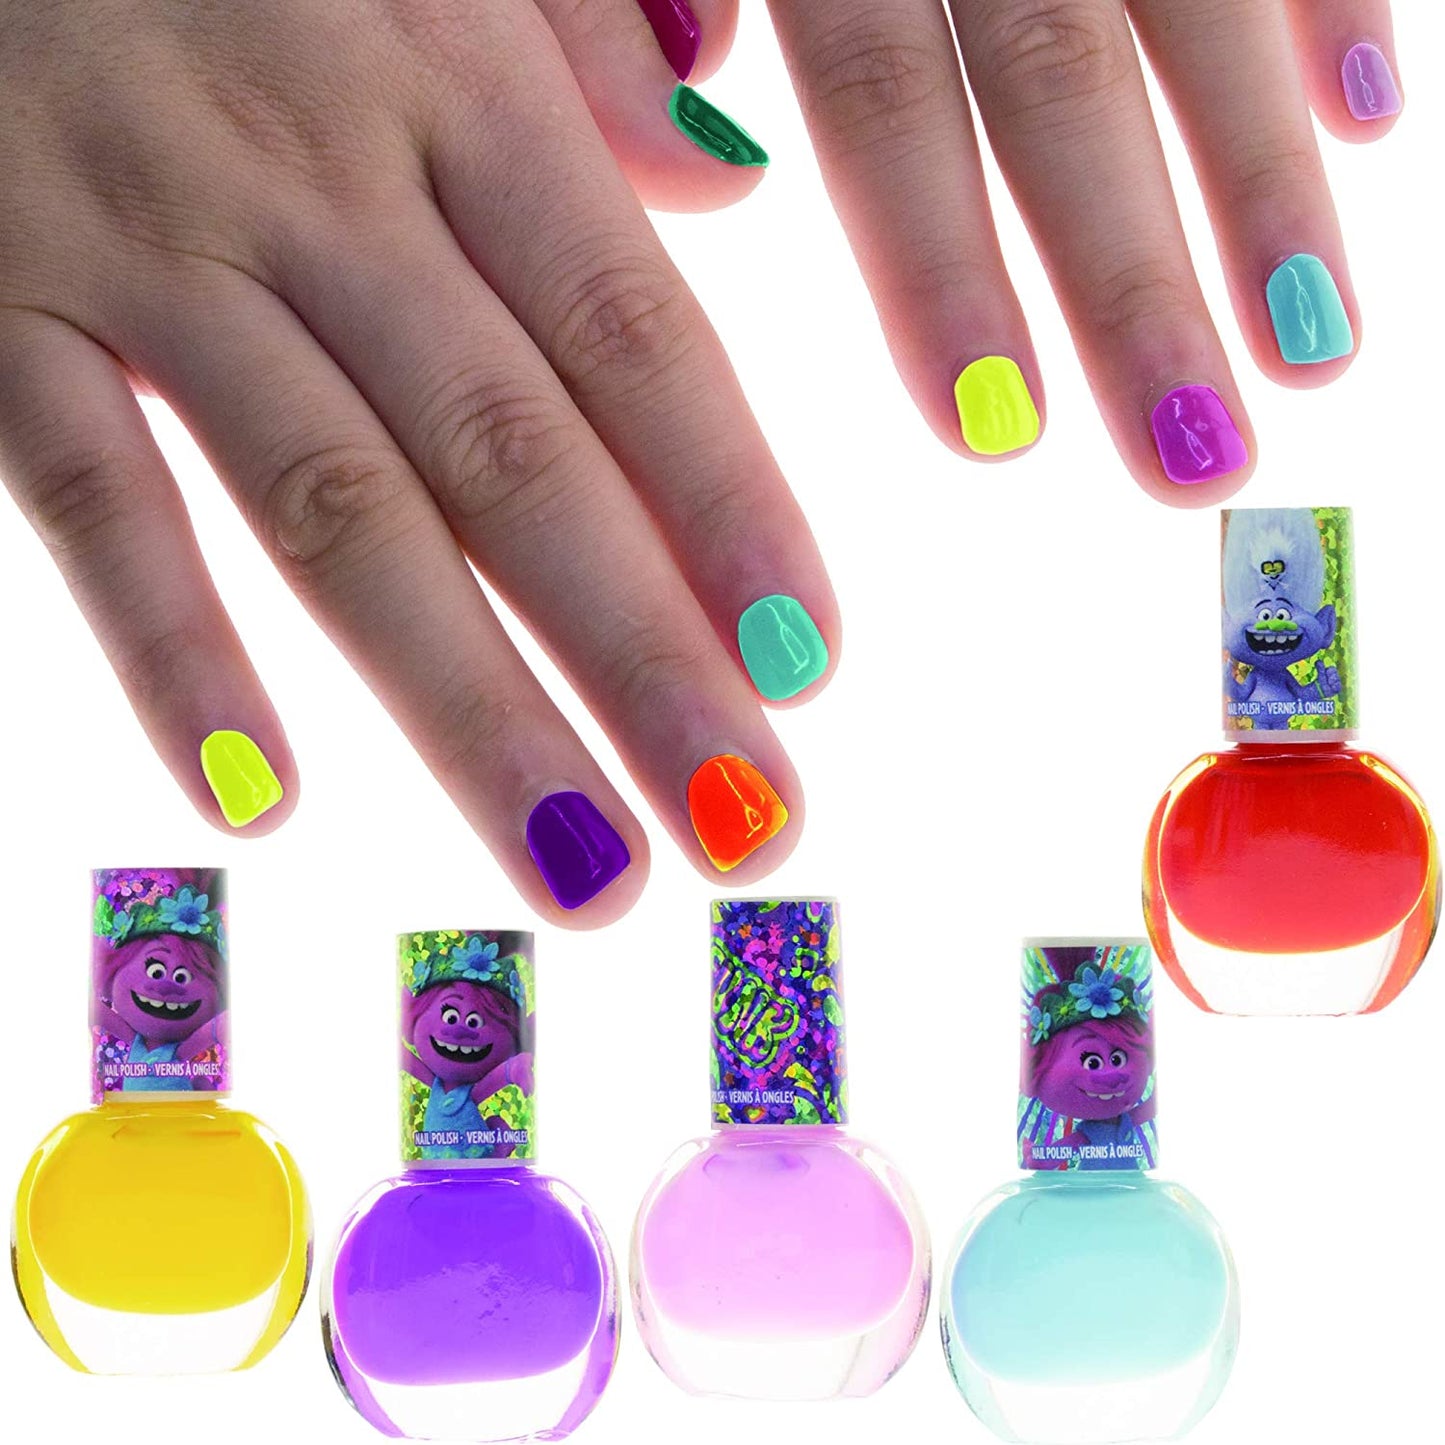 Dreamworks Trolls Non-Toxic Peel-Off Nail Polish, Deluxe Set for Kids, some with Glitter